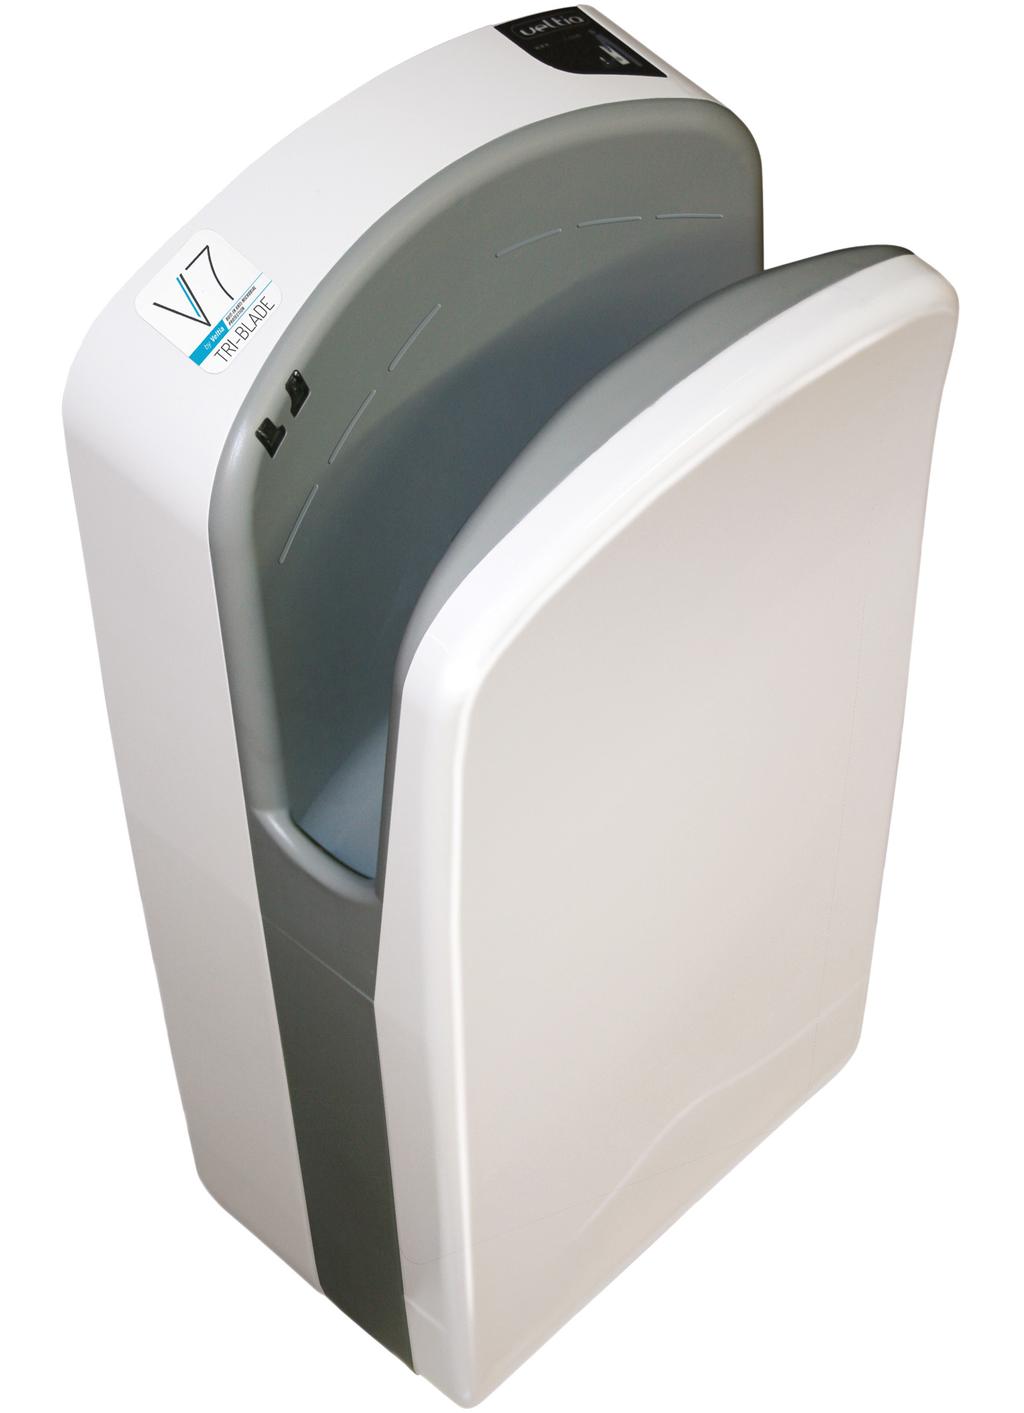 Aluminium Matte Silver Aluminium High speed hand drying with water collection as standard Atlantic Blue Black Boureaux Red 3 blades of air strategically placed to dry your hands in under 10 seconds.